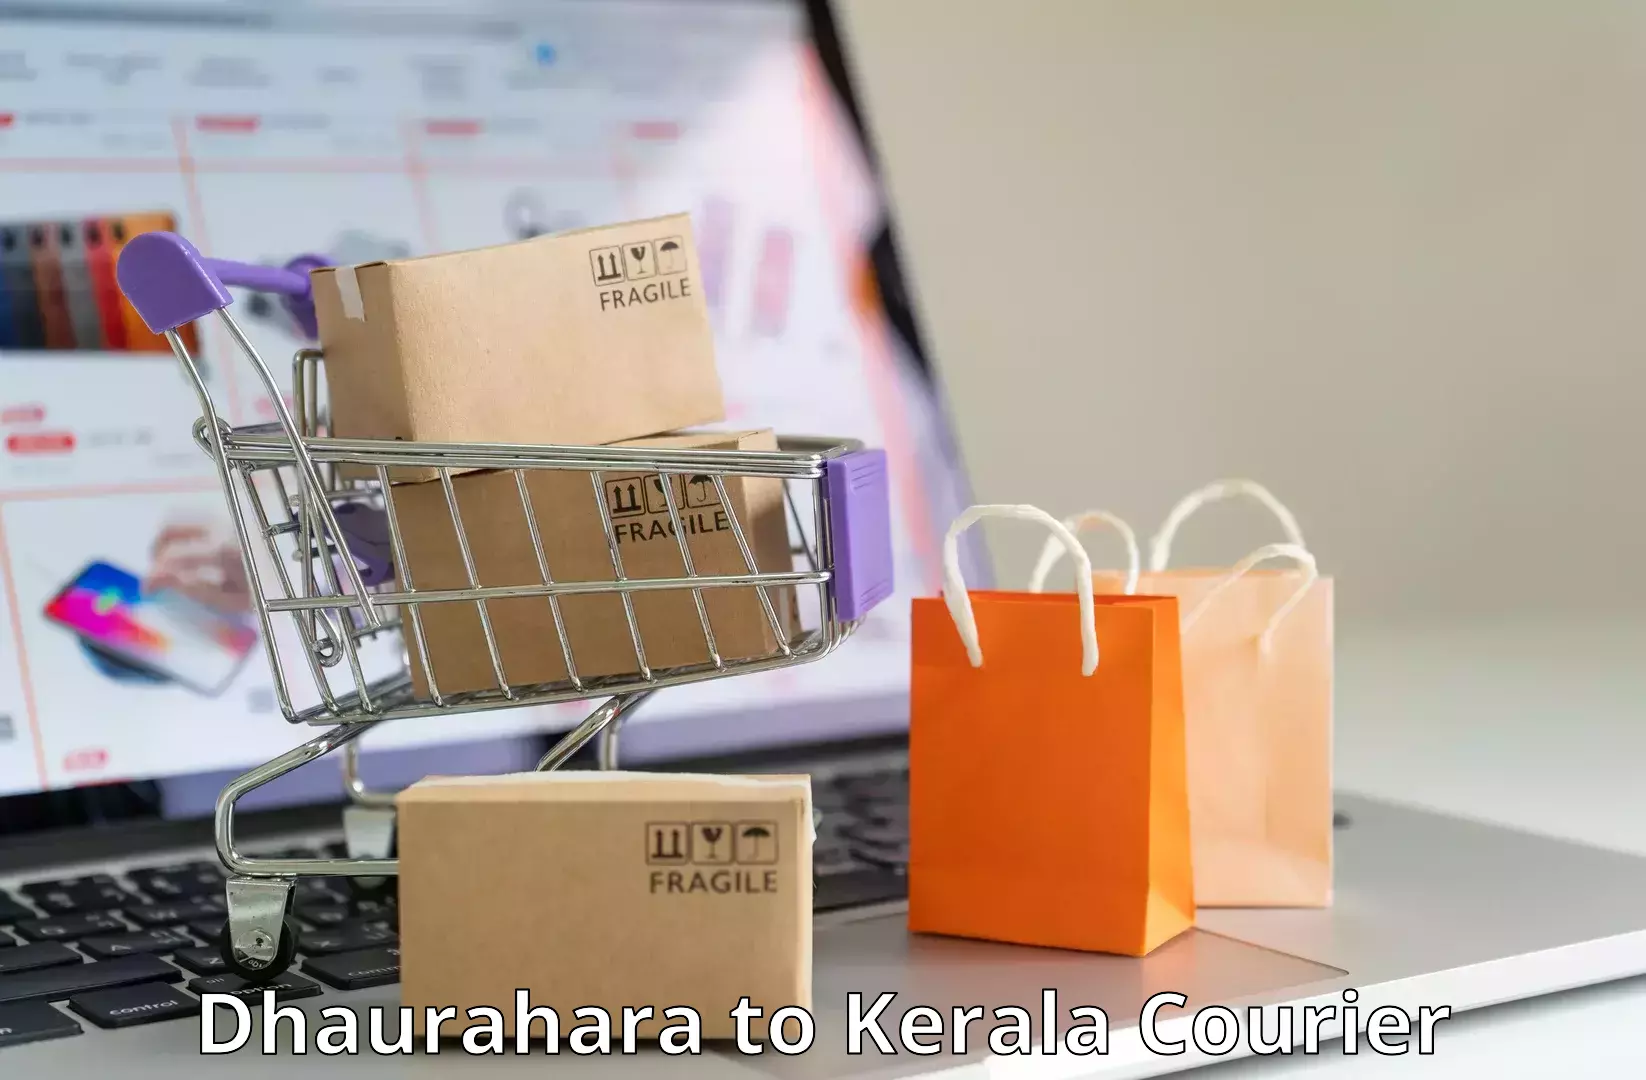 Comprehensive freight services Dhaurahara to Kochi